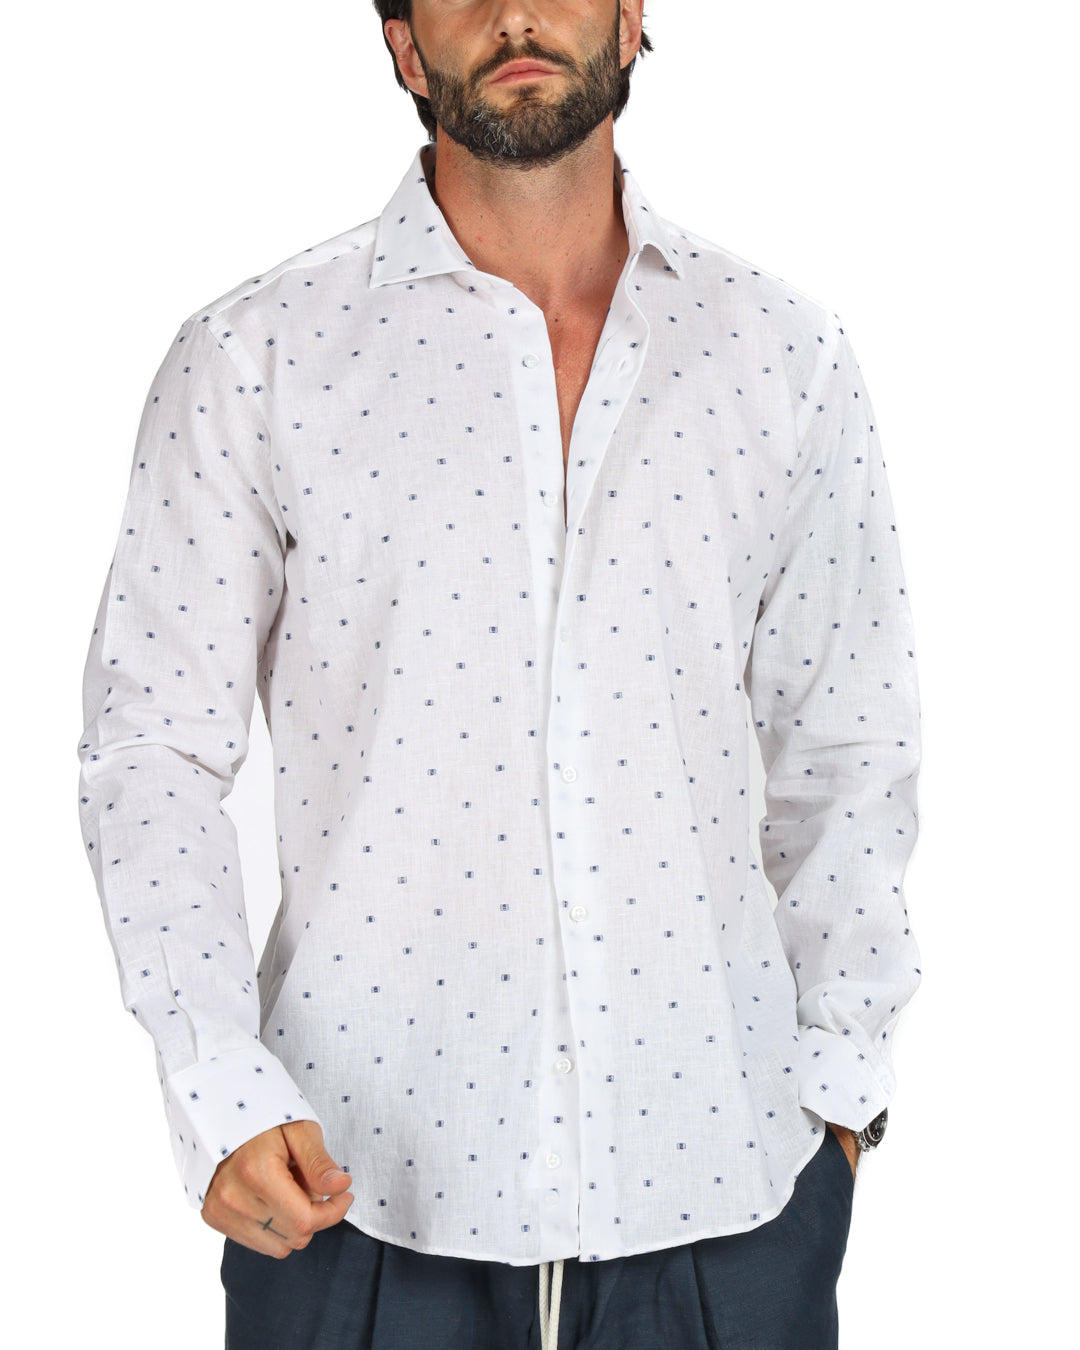 Salina - Classic white linen shirt with blue embroidery